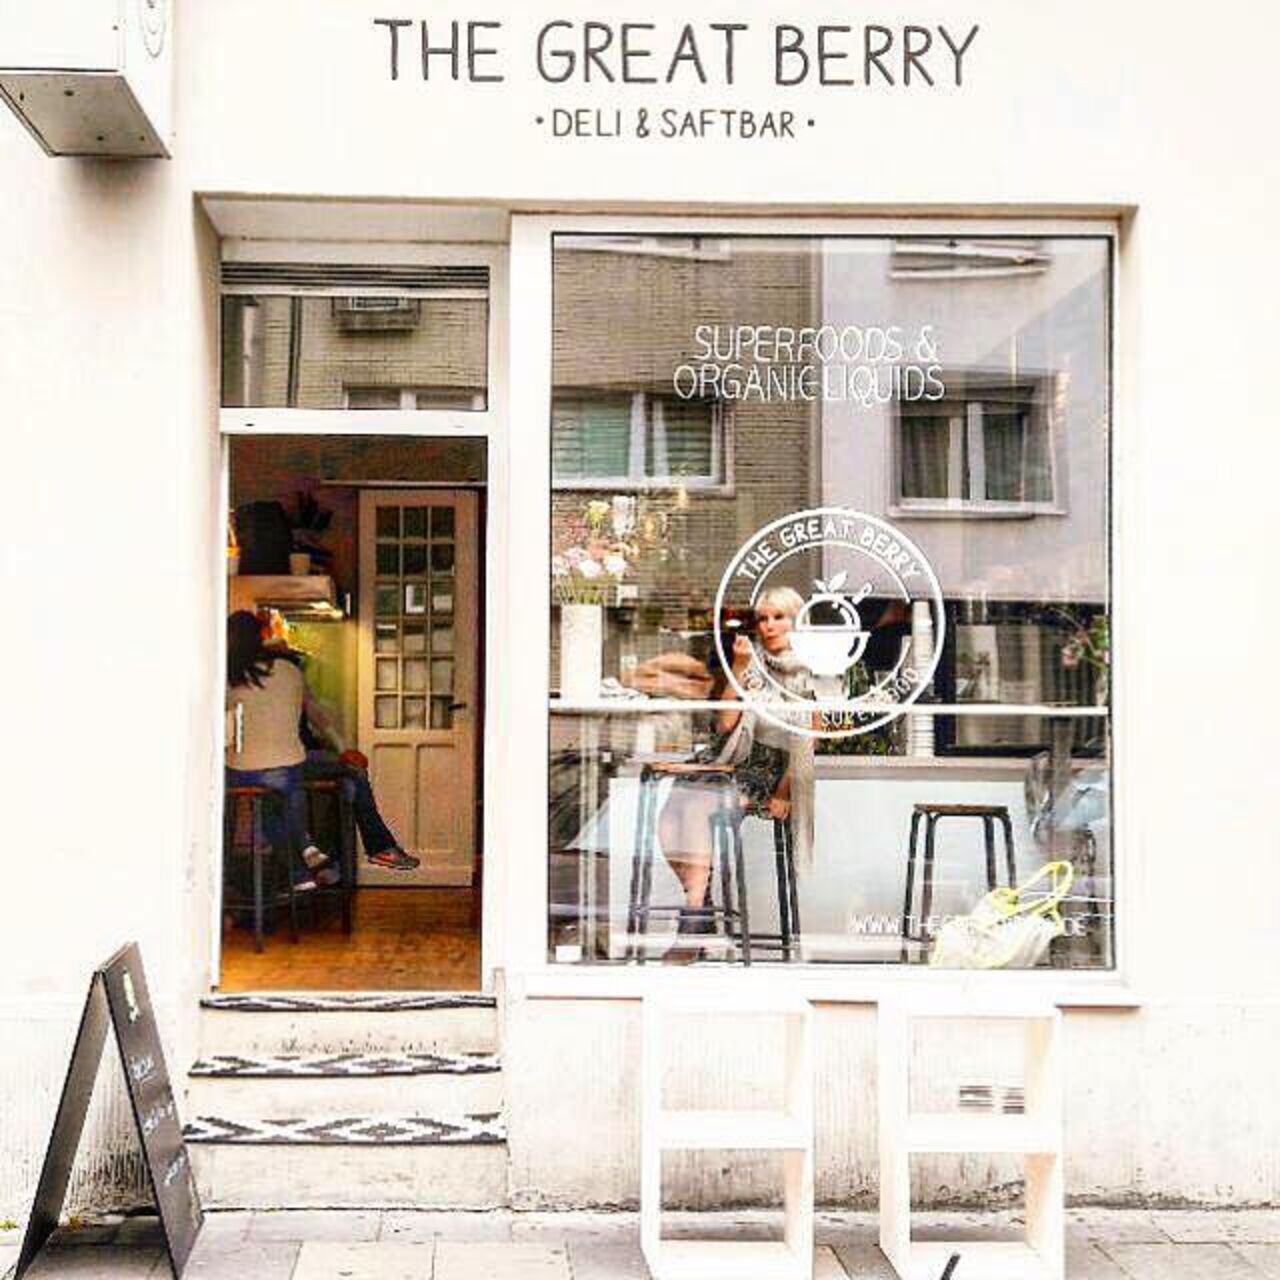 A photo of The Great Berry